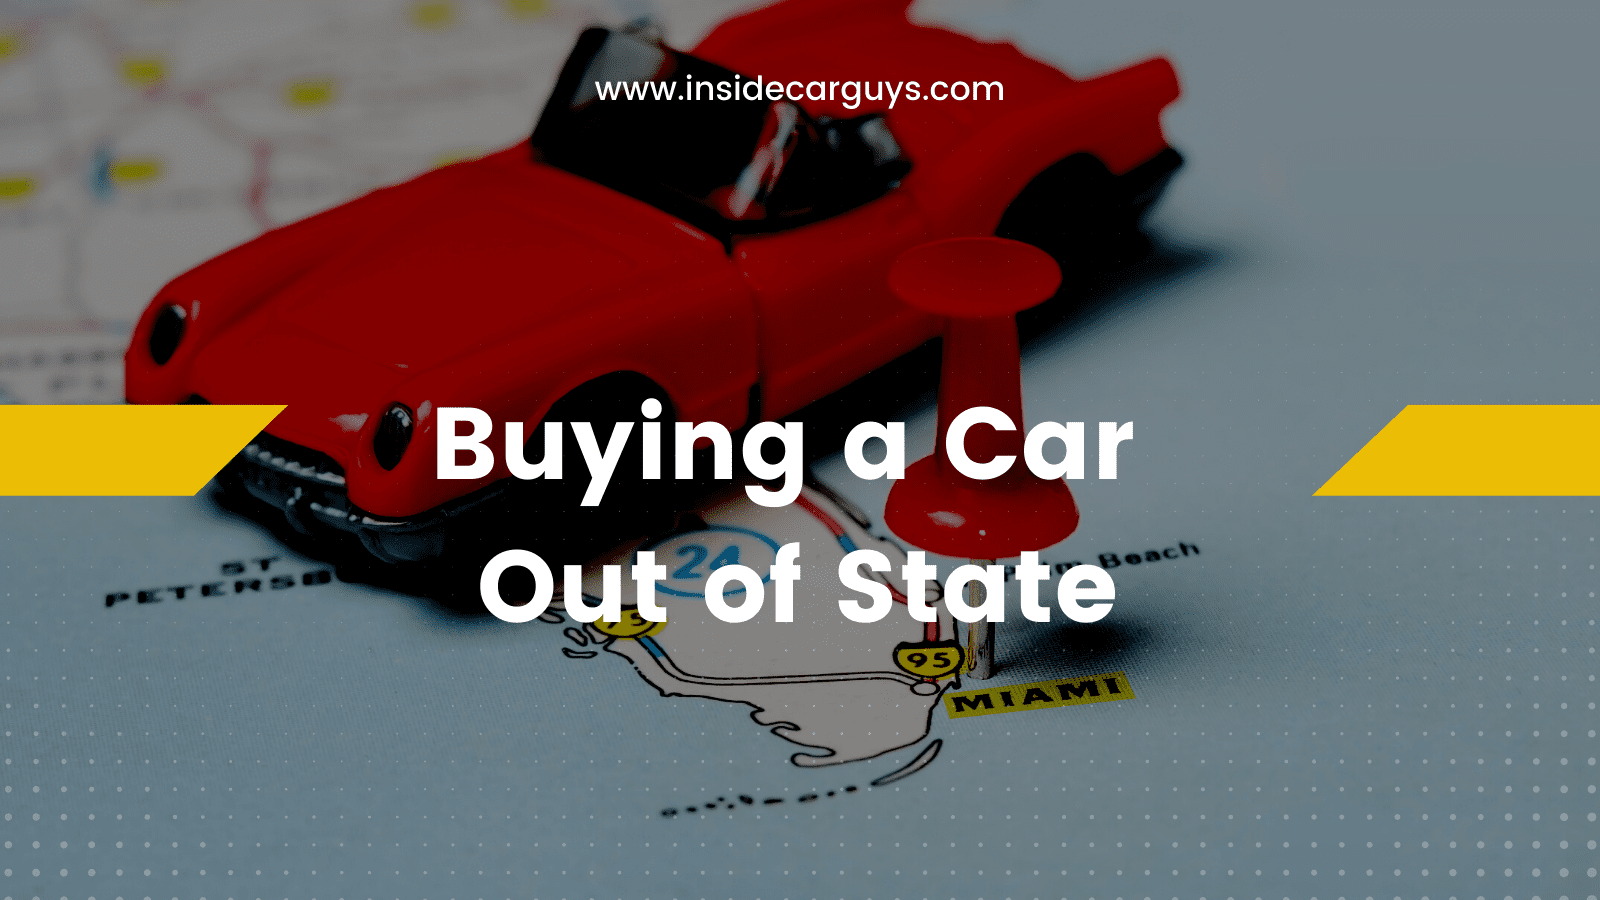 Buying a Car Out of State A Quick Guide. Inside Car Guys